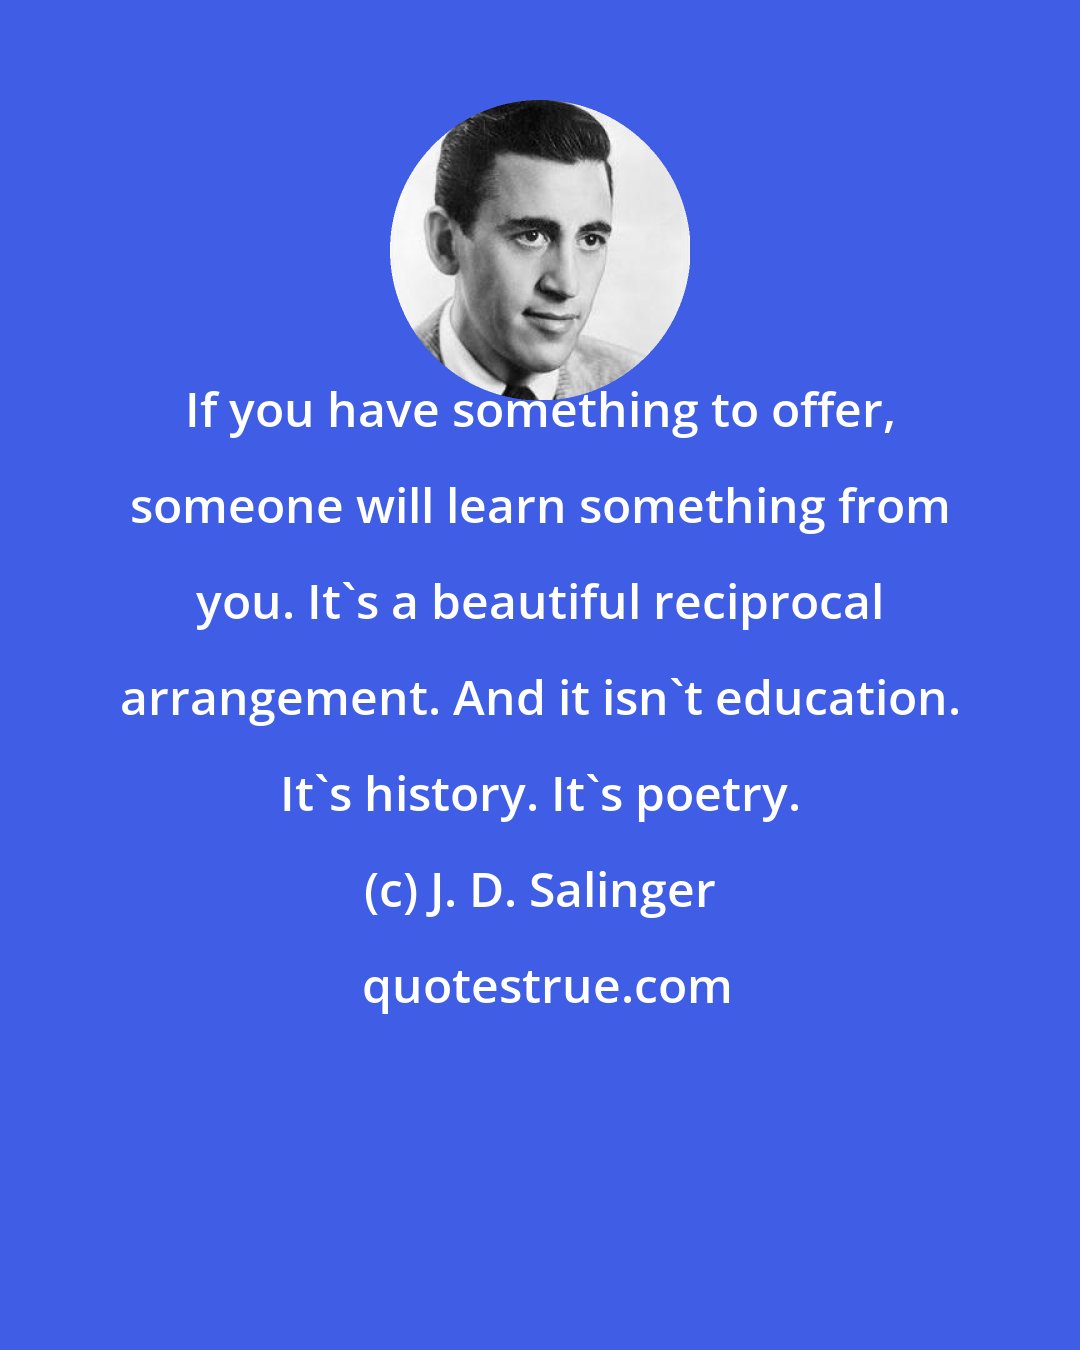 J. D. Salinger: If you have something to offer, someone will learn something from you. It's a beautiful reciprocal arrangement. And it isn't education. It's history. It's poetry.